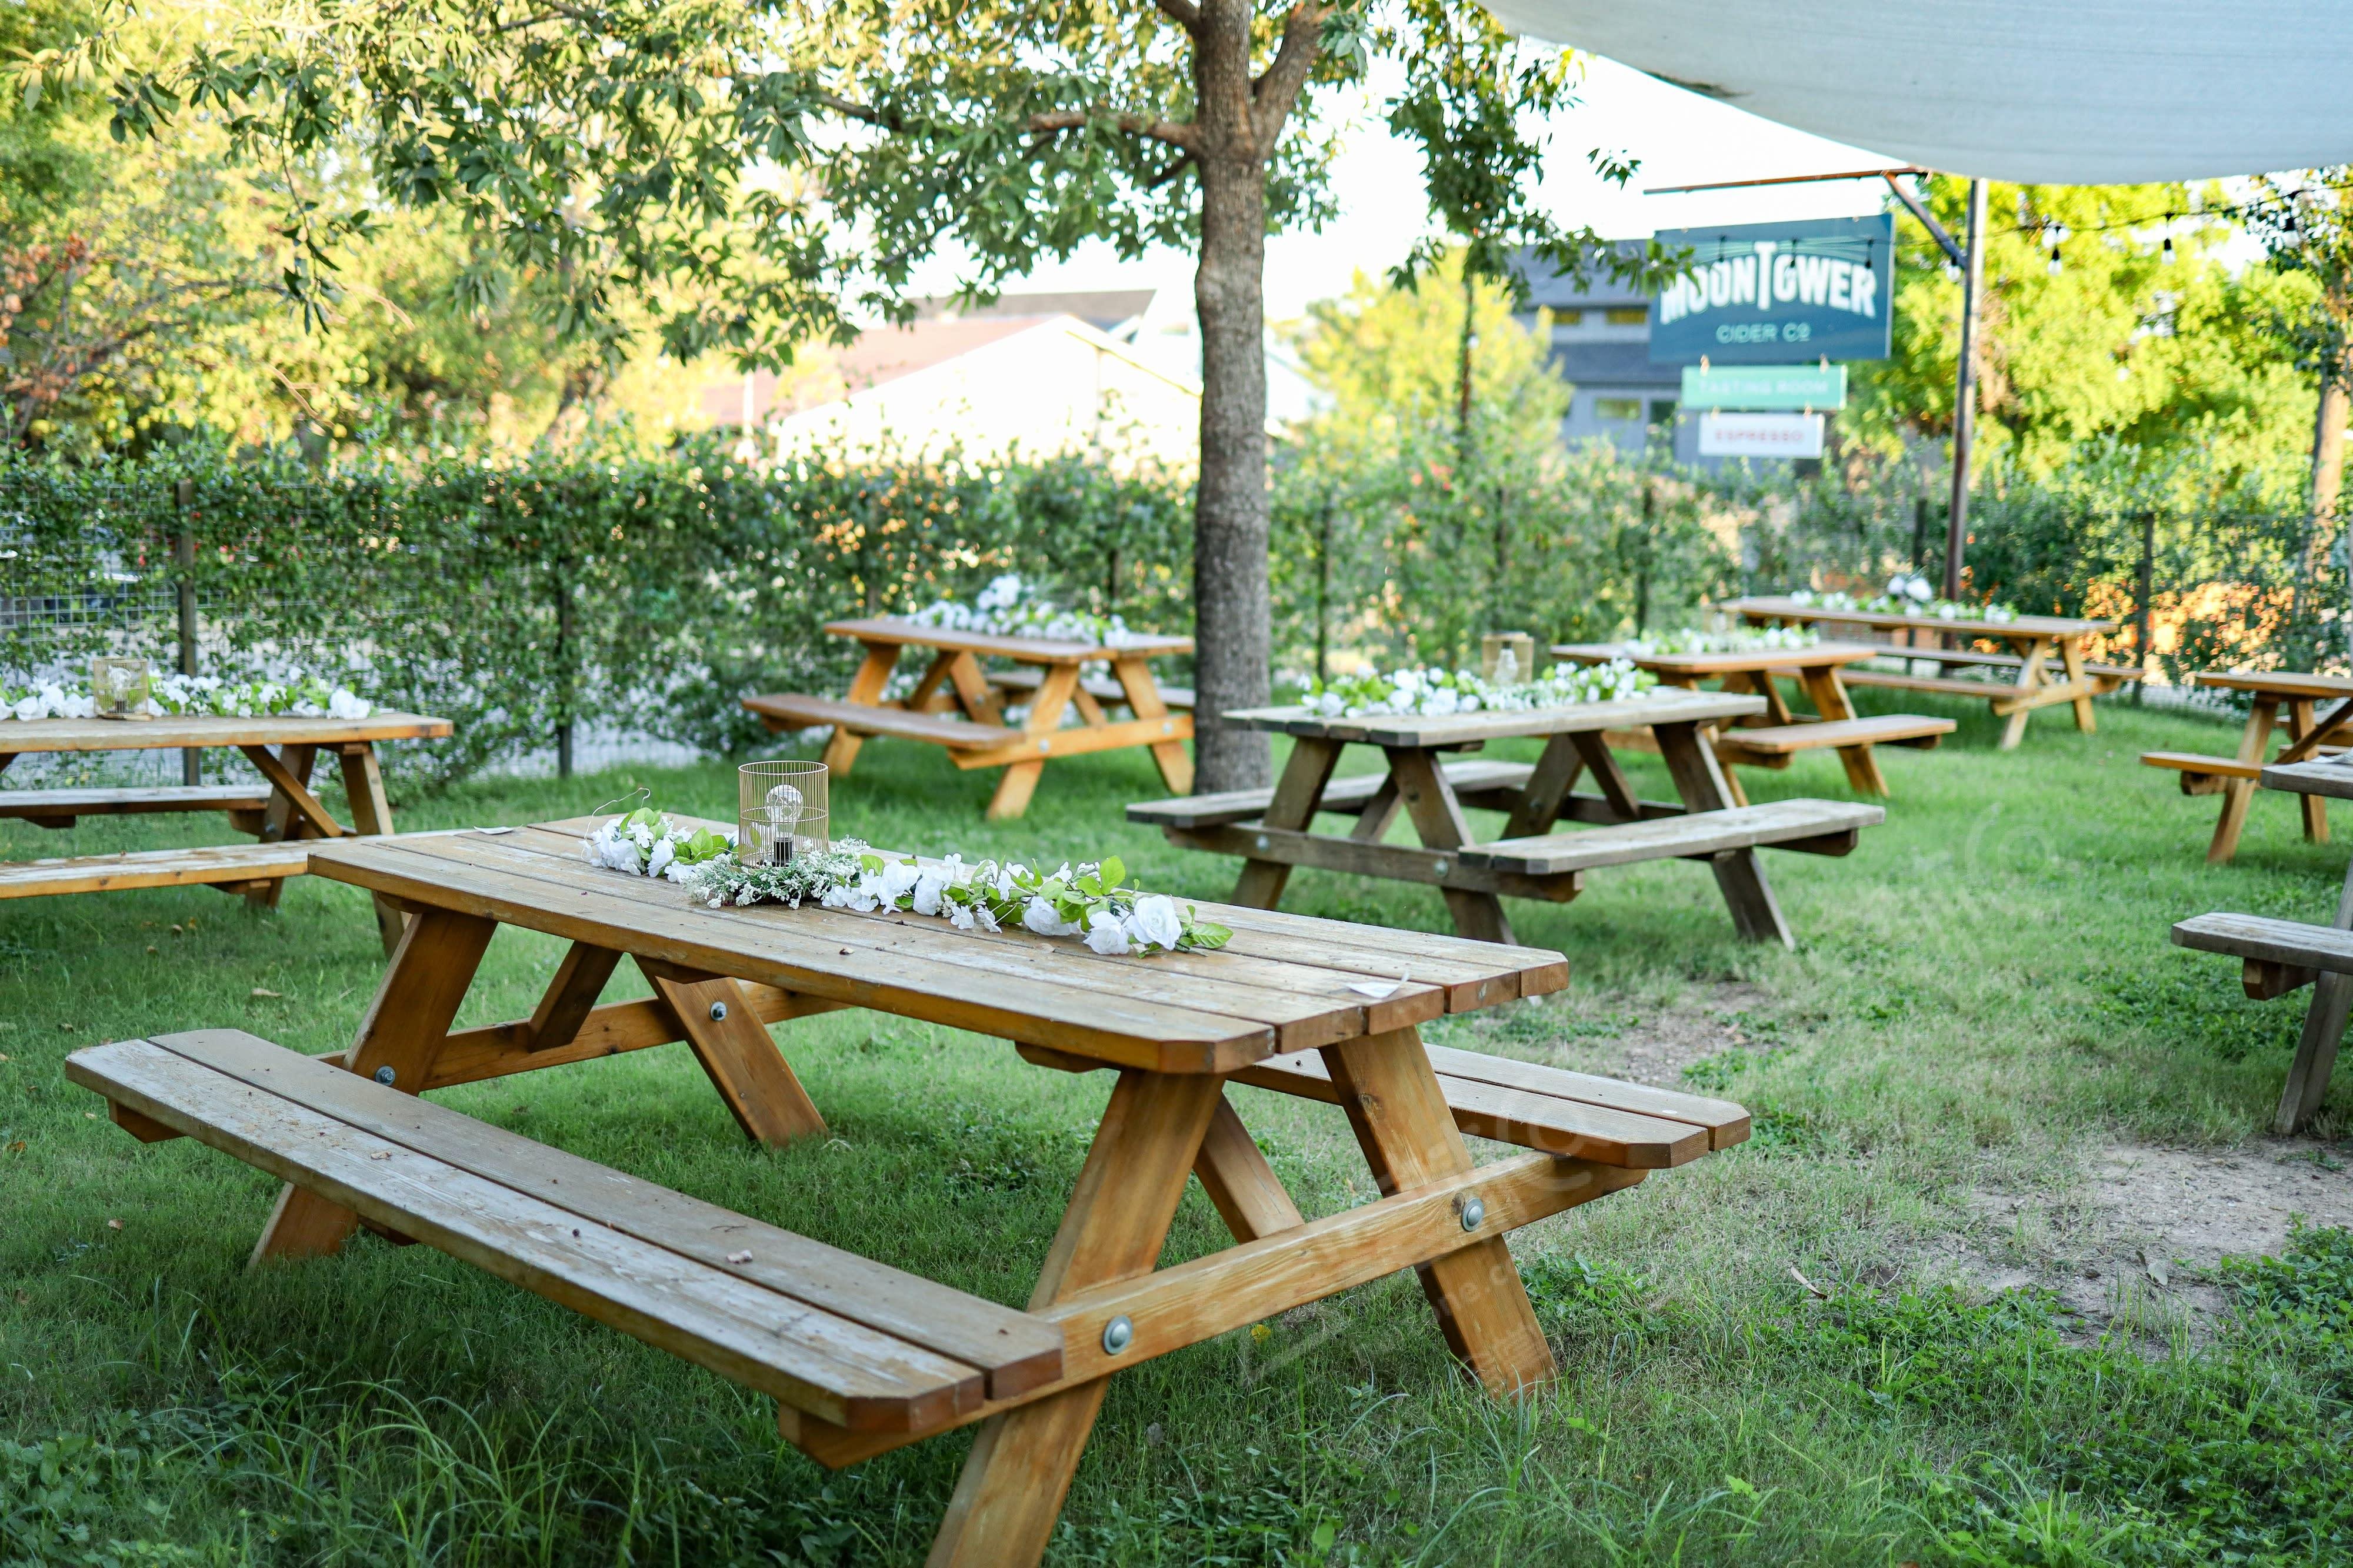 Outdoor Cider Garden with Covered Tent